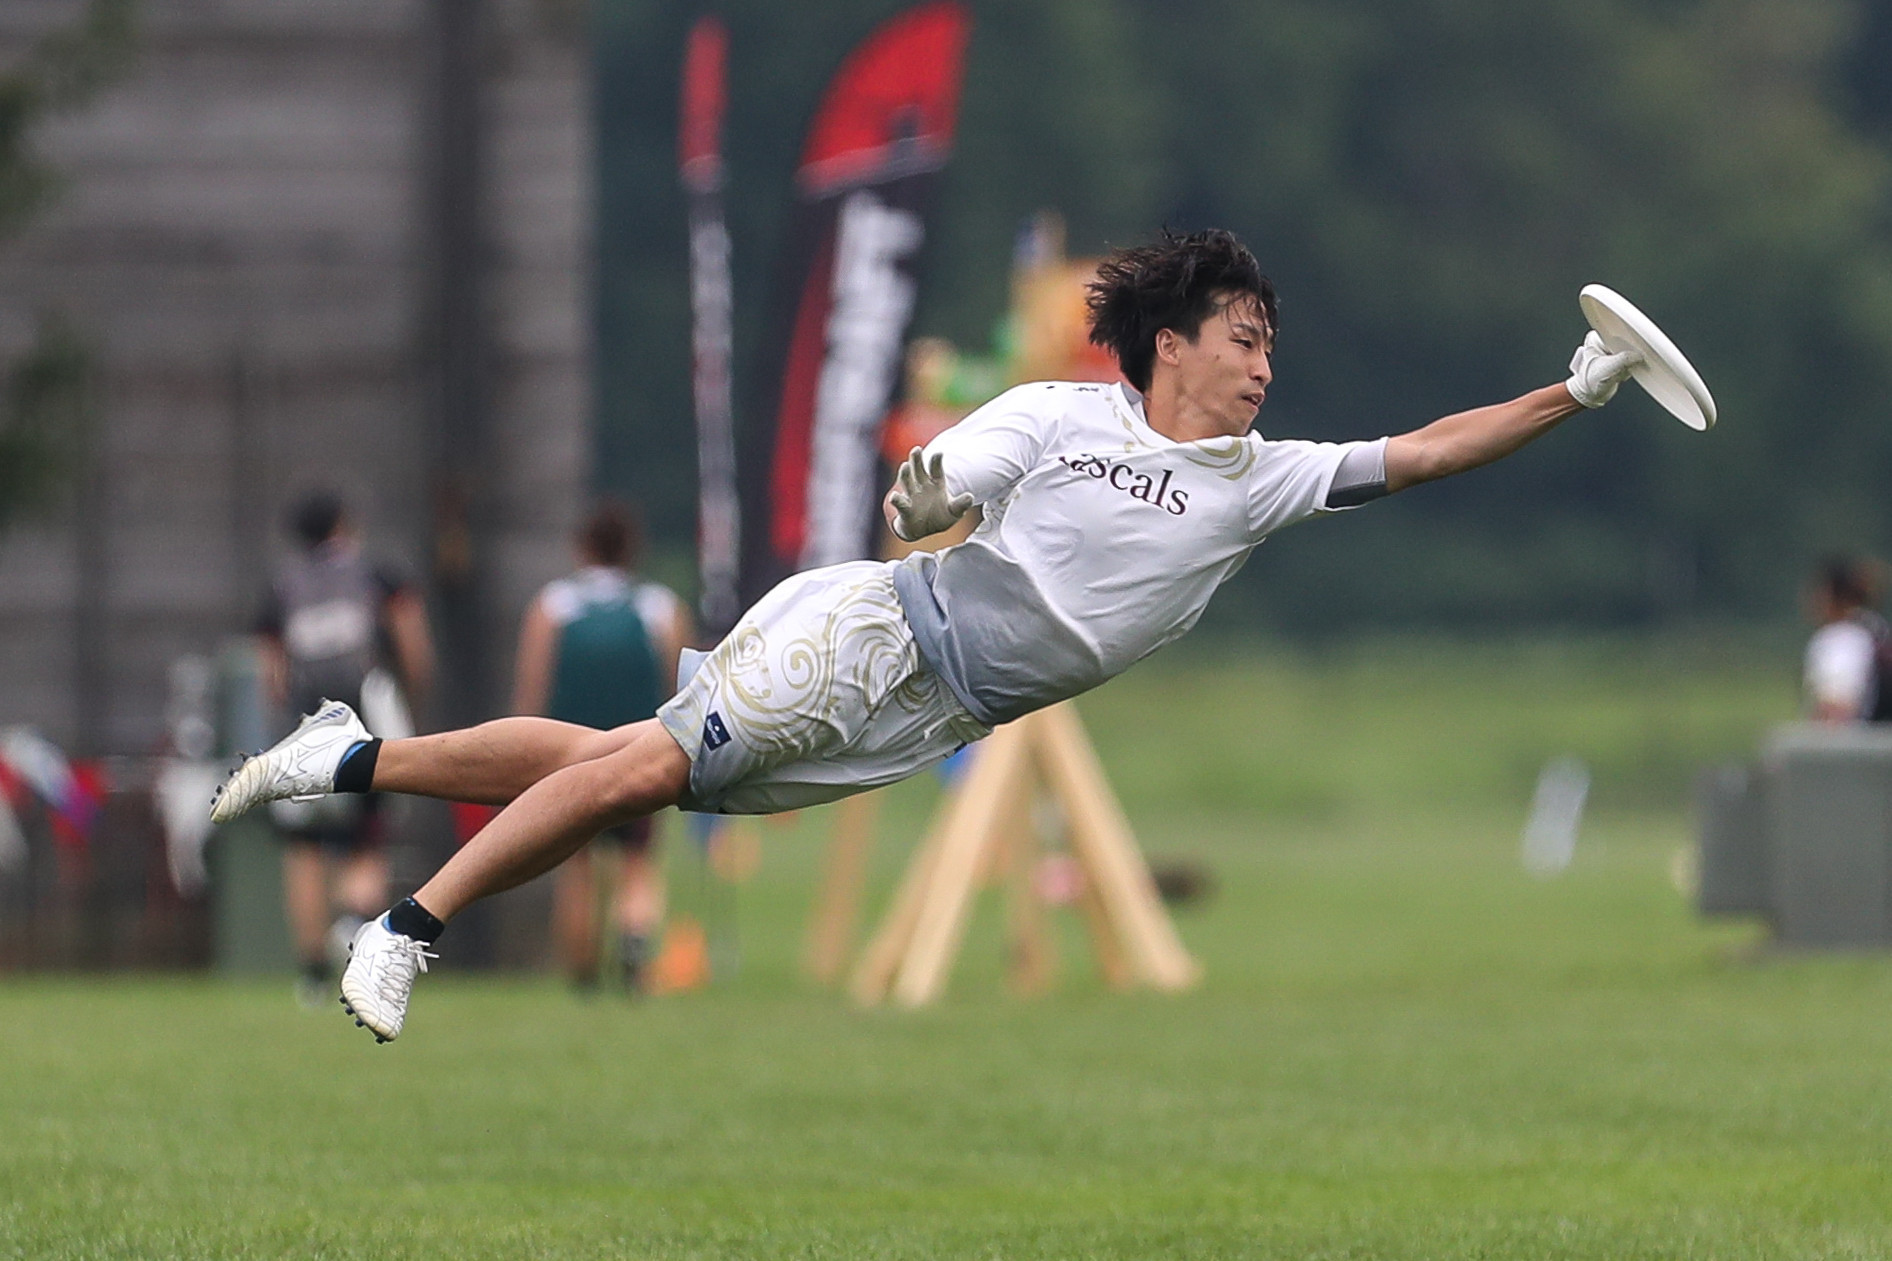 Rascals fell to defeat twice in Pool B of the open event © Paul Rutherford for UltiPhotos